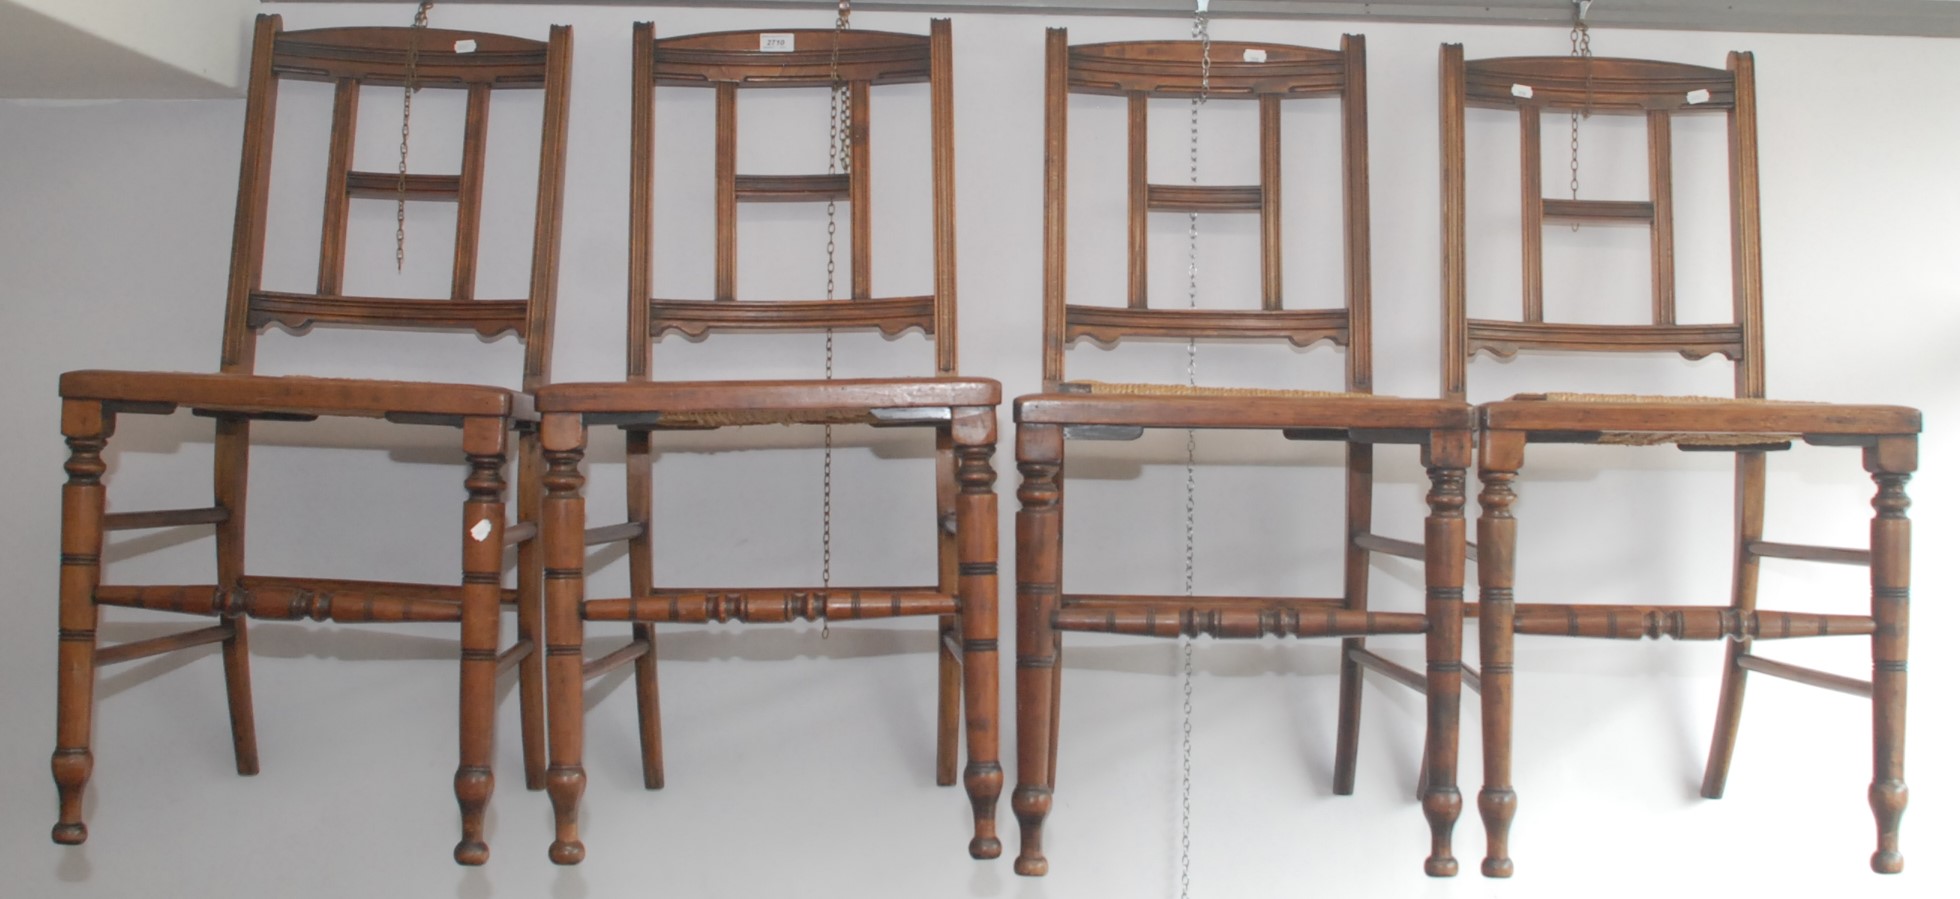 A set of four high Victorian chairs with rush seats.